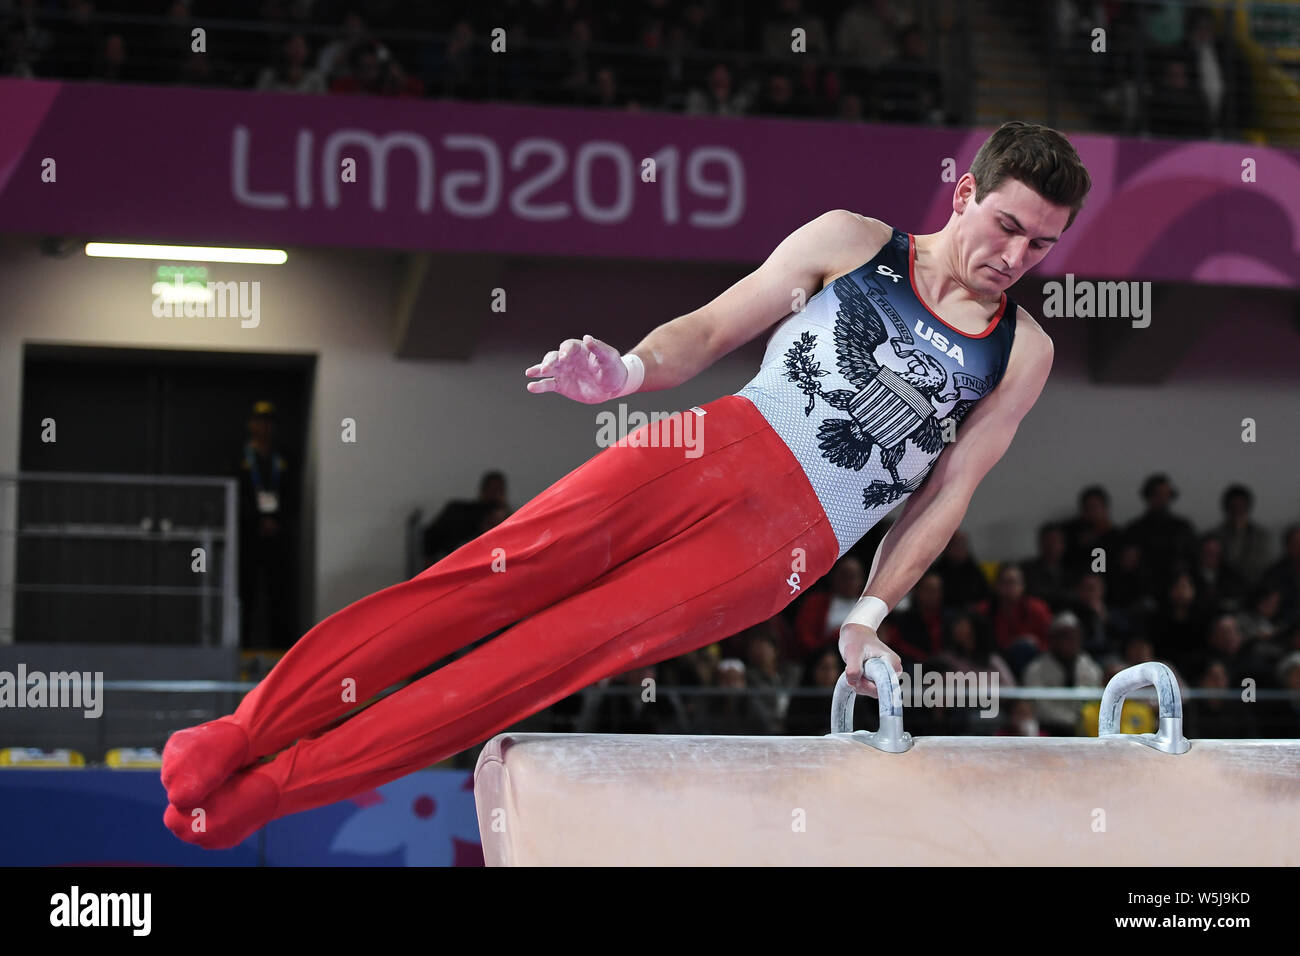 July 28, 2019, Lima, Peru: ROBERT NEFF from the US competes on the pommel horse during the team finals competition held in the Polideportivo Villa El Salvador in Lima, Peru. Credit: Amy Sanderson/ZUMA Wire/Alamy Live News Stock Photo